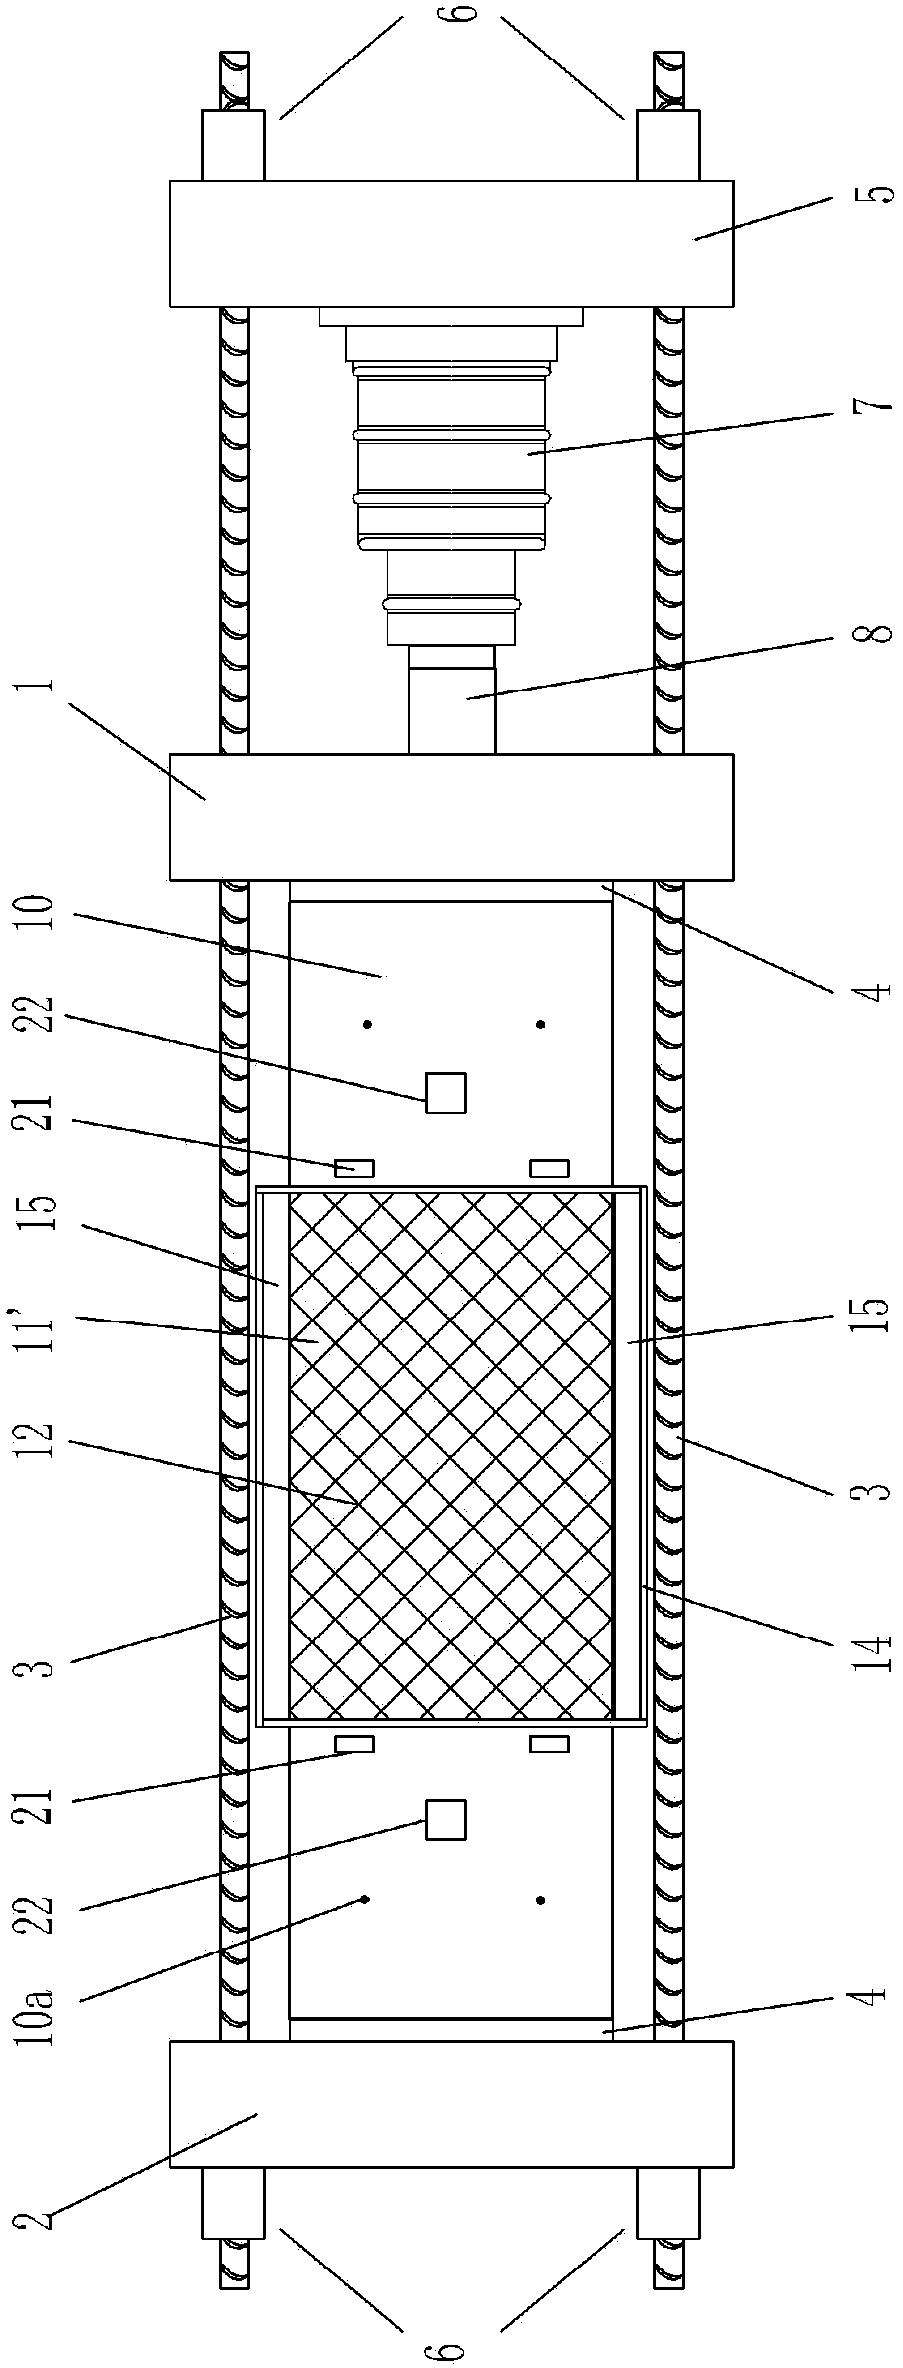 Accelerated Corrosion Deterioration Test Device for Tunnel Lining Structure under Loading Condition